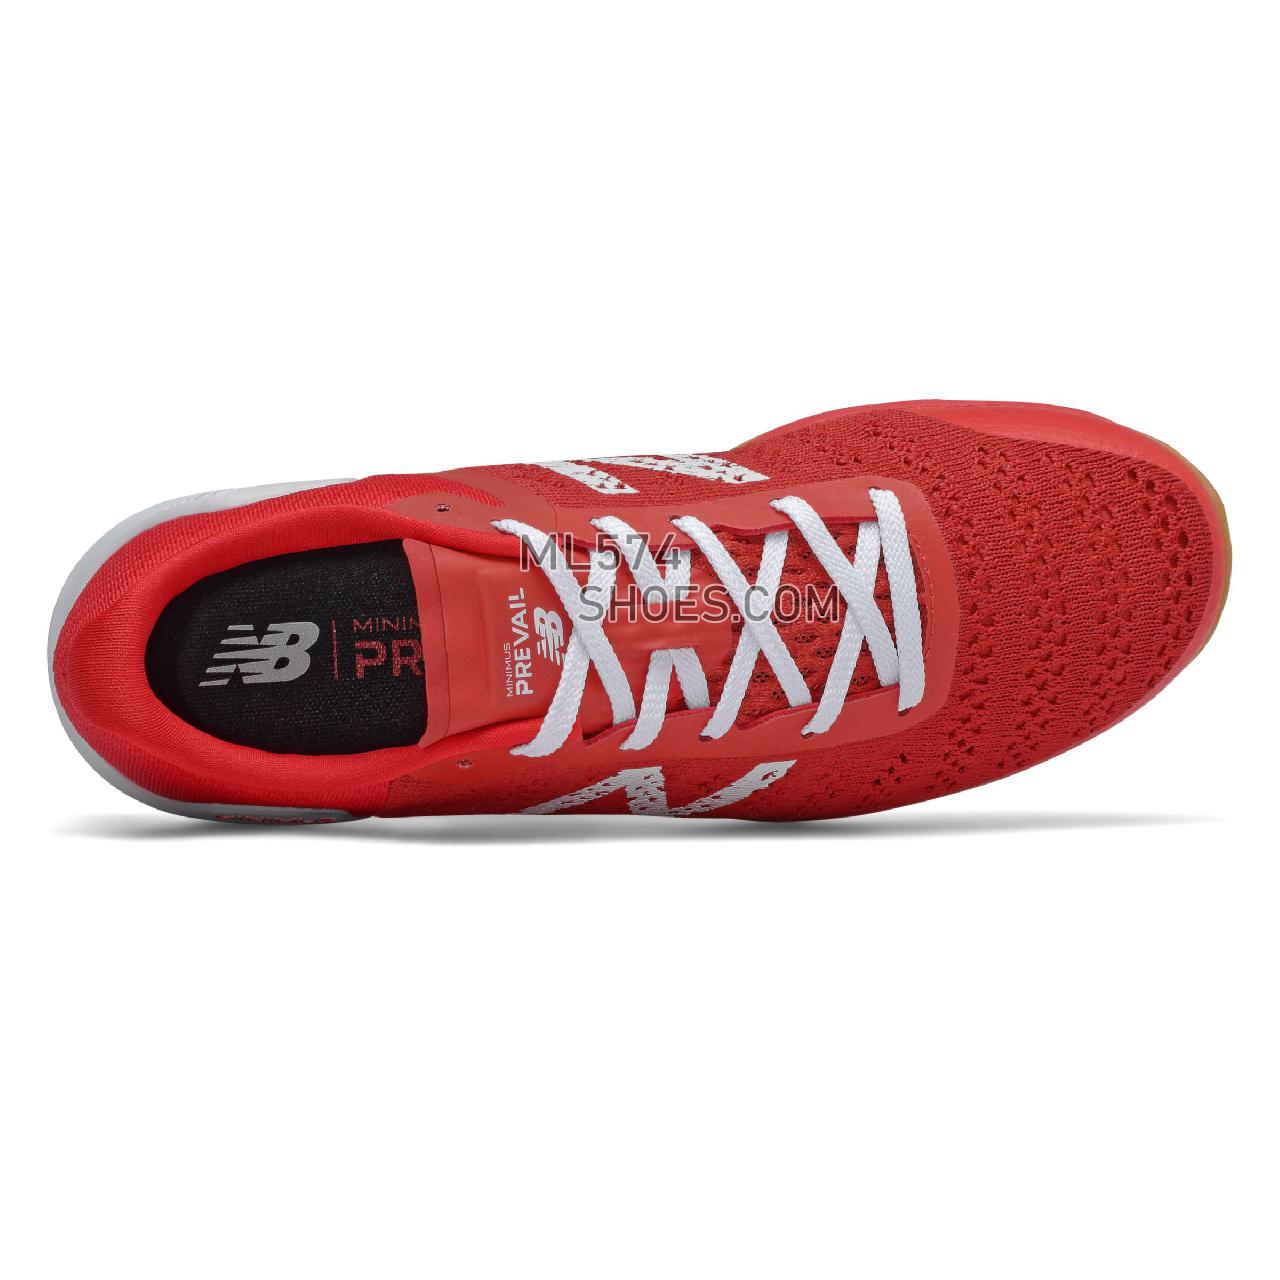 New Balance Minimus Prevail - Men's Cross-Training - Team Red with White and Gum - MXMPRR1